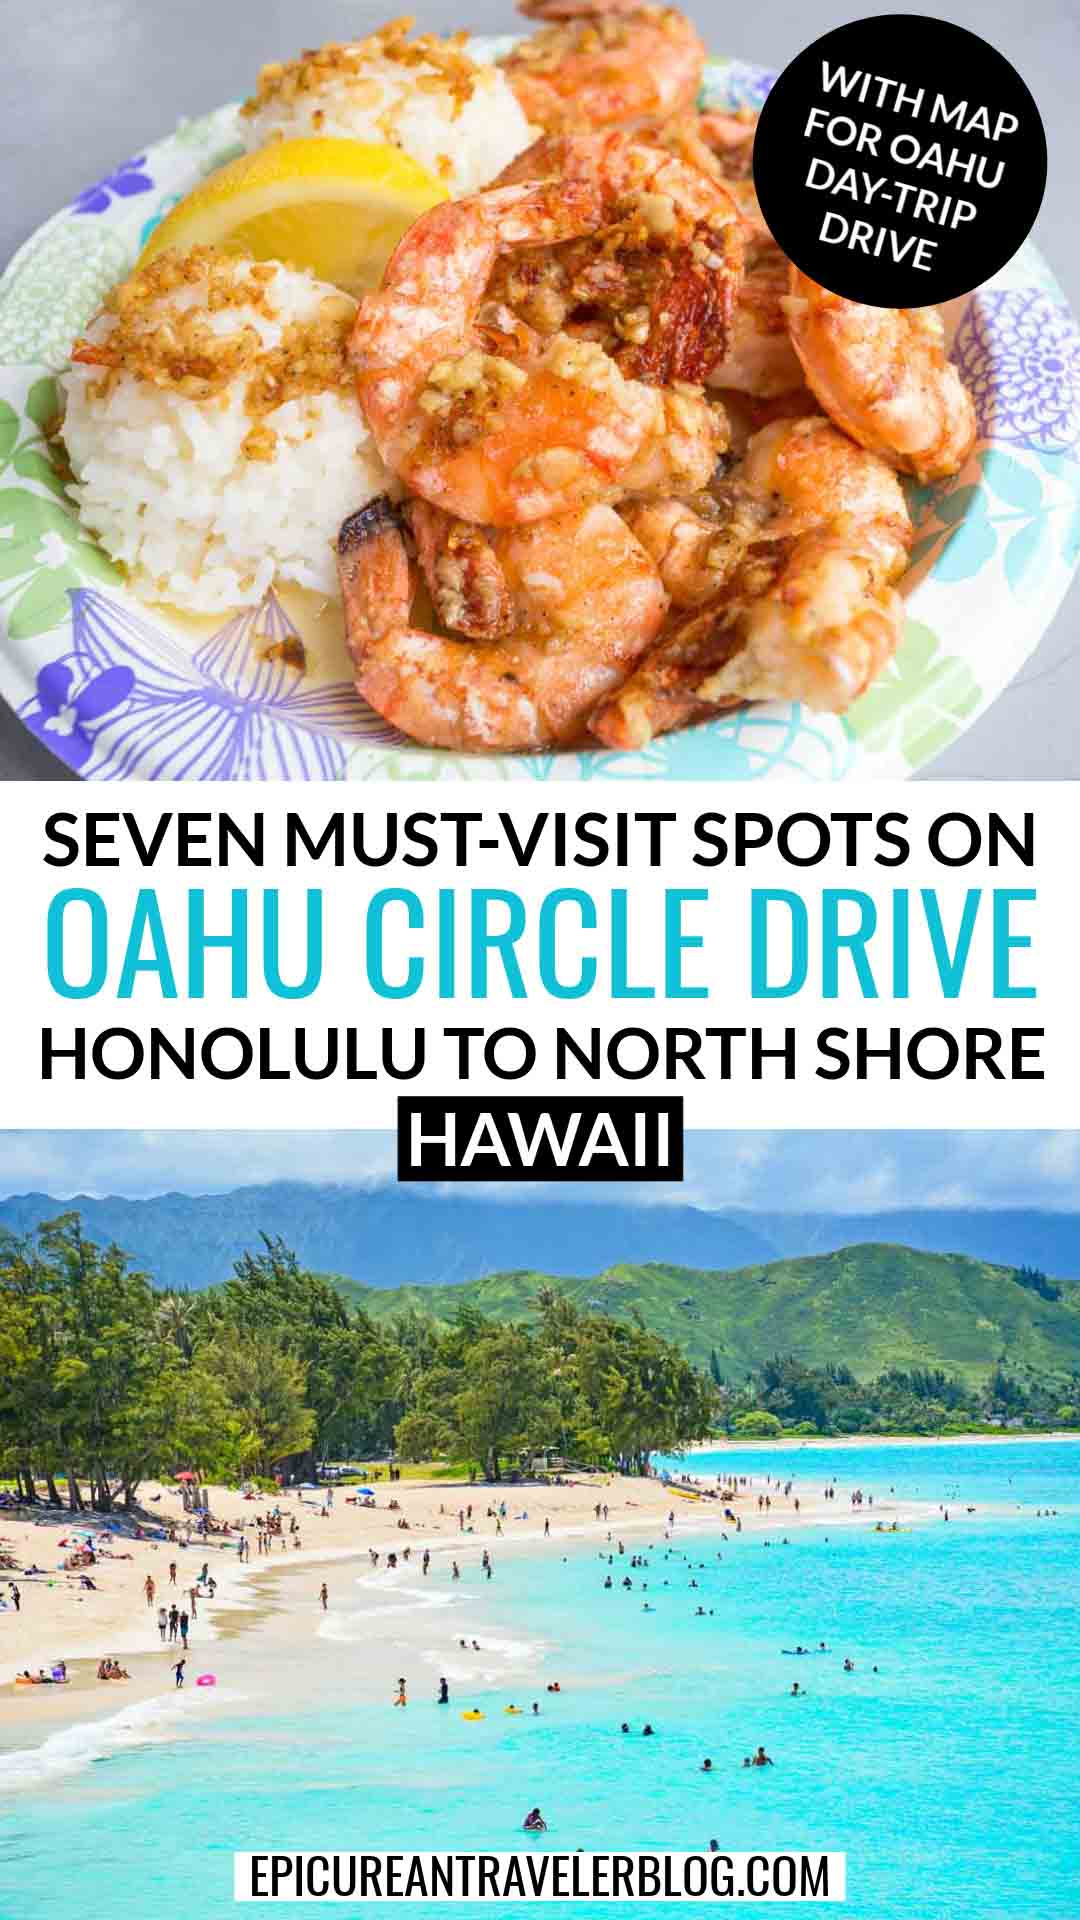 Seven must-visit spots on an Oahu circle drive from Honolulu to the North Shore on Oahu in Hawaii